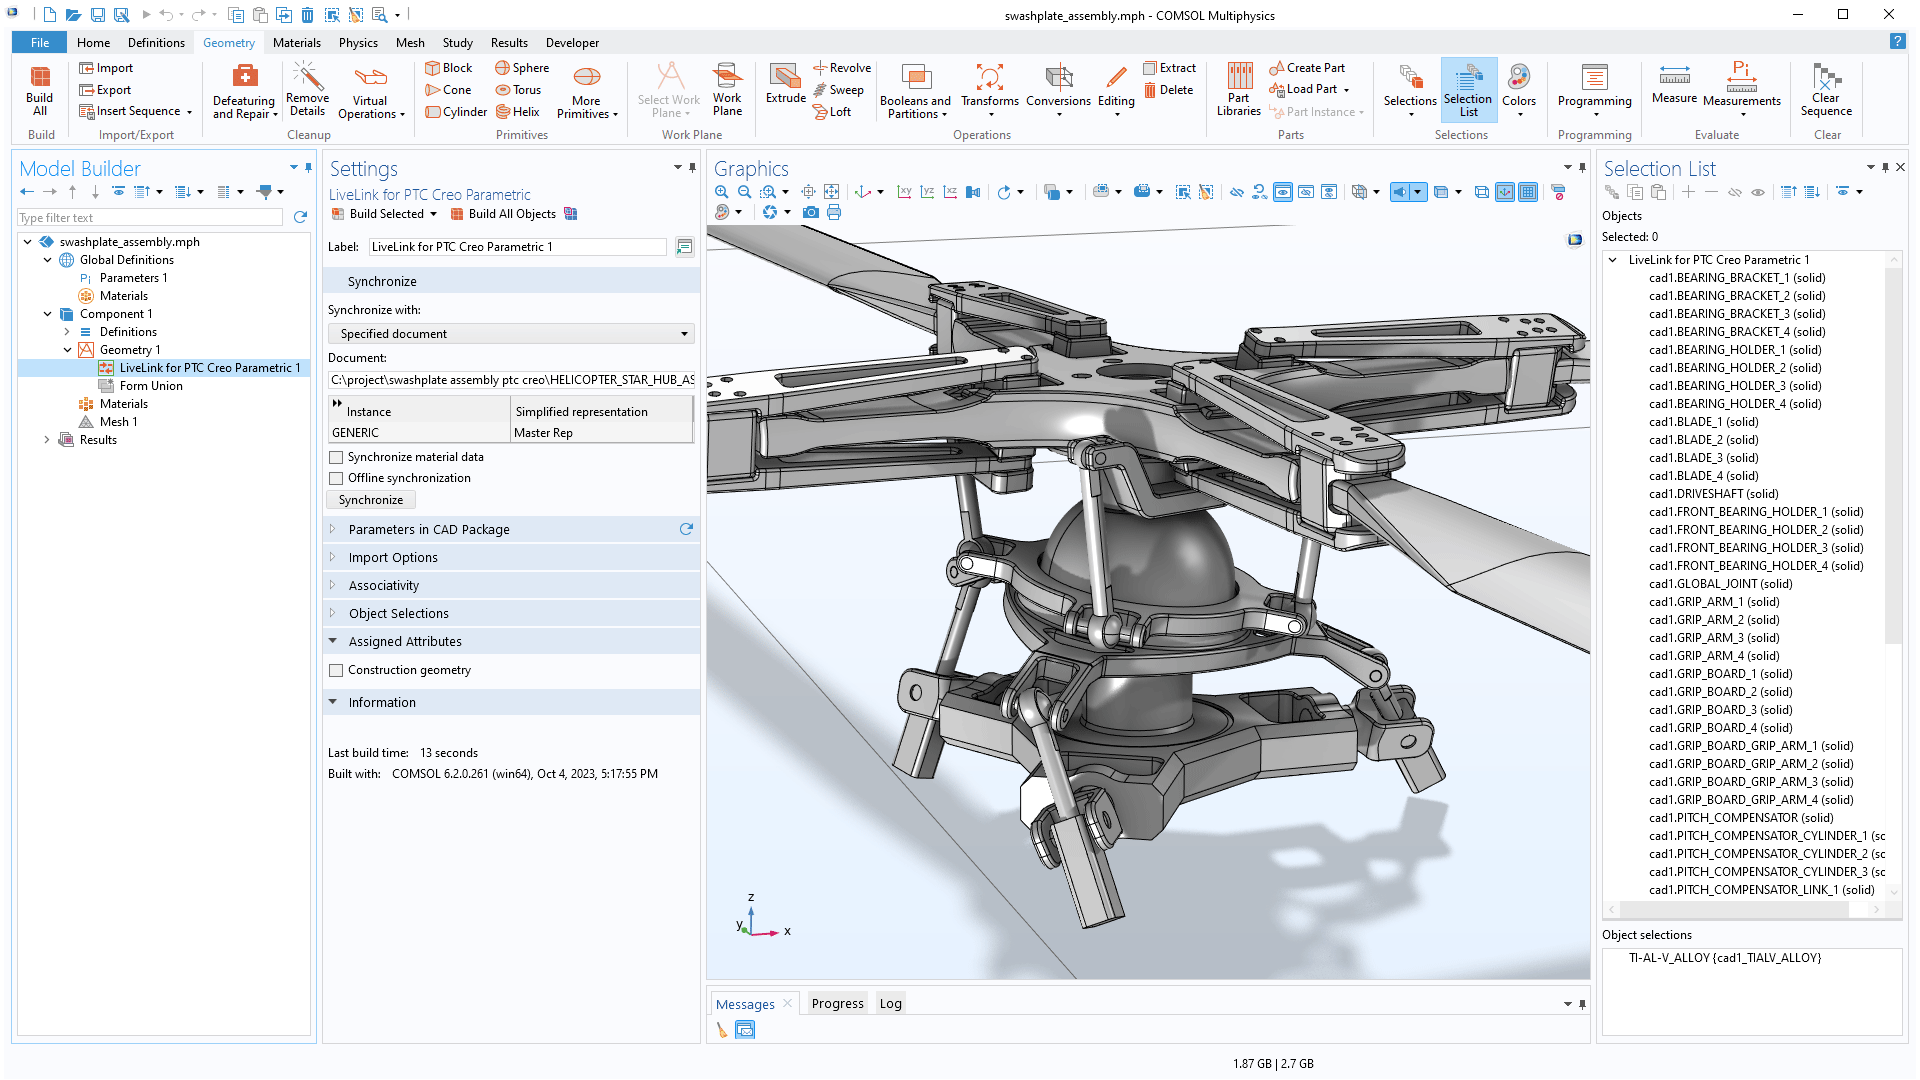 The COMSOL Multiphysics UI showing the Model Builder with the LiveLink for PTC Creo Parametric node highlighted, the corresponding Settings window, a helicopter model in the Graphics window, and the Selection List window open.